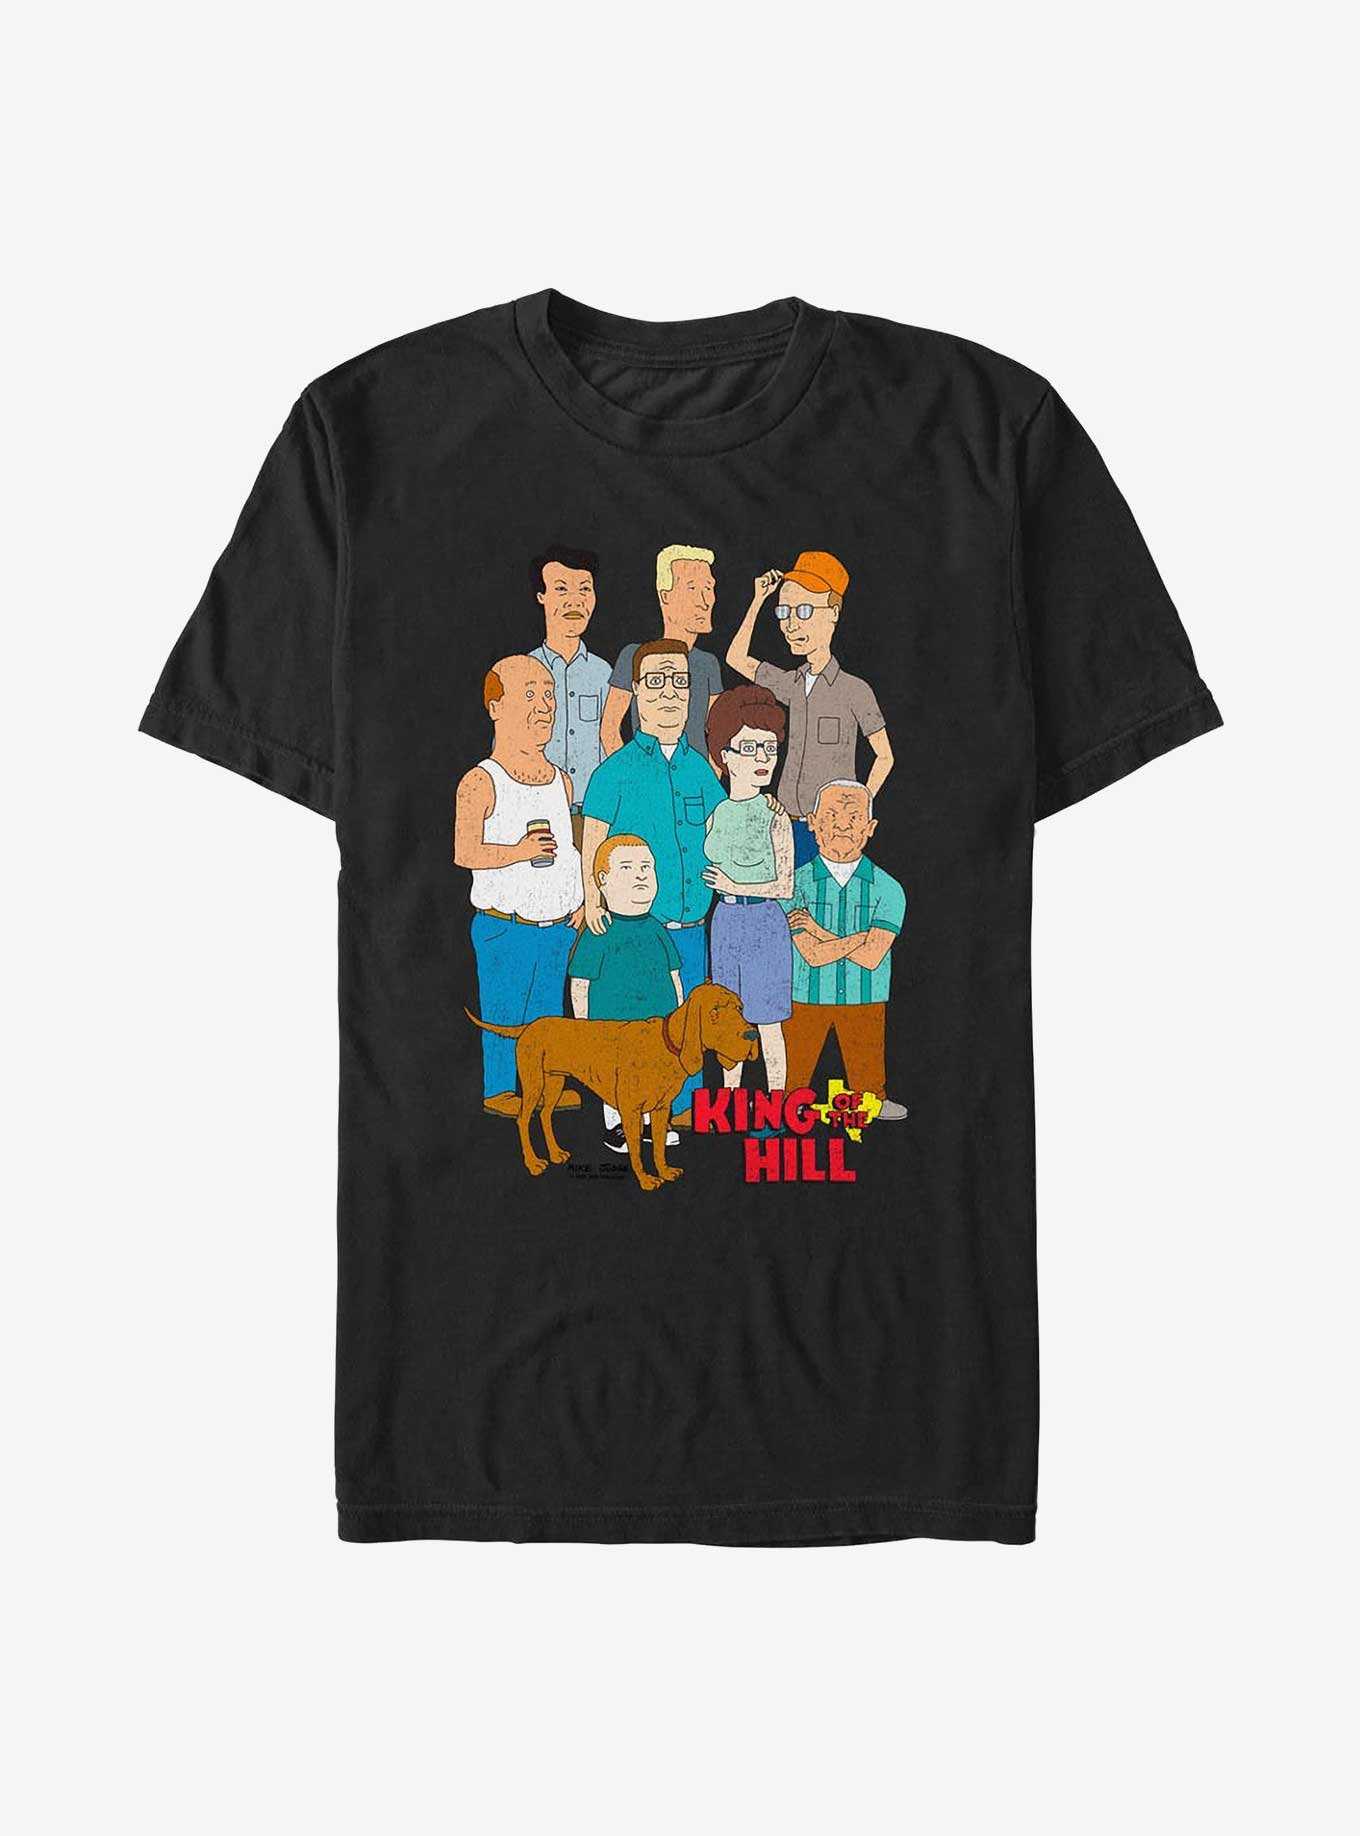 King of the Hill Group T-Shirt, , hi-res